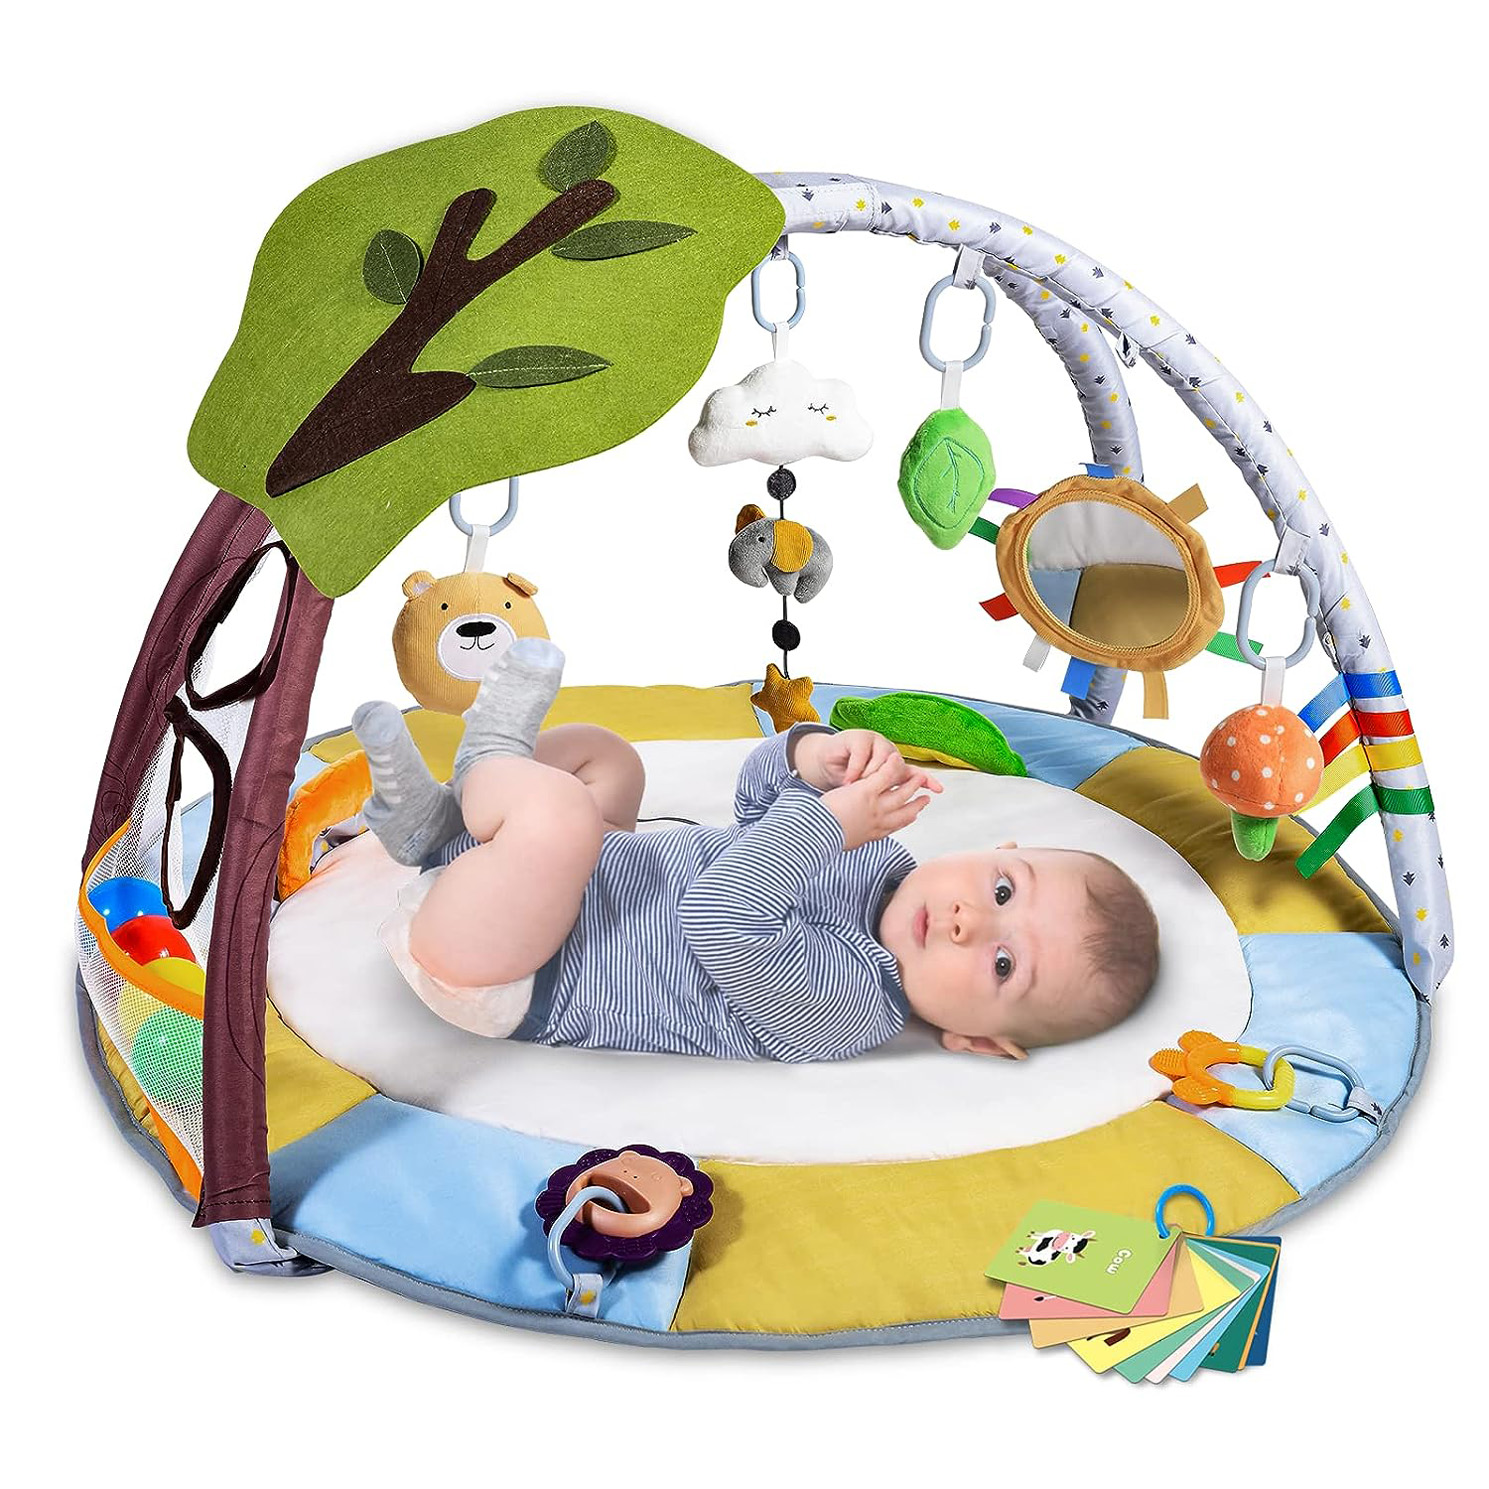 Lupantte Baby Gym Play Mat with 9 Toys for Sensory and Motor Skill Development Language Discovery